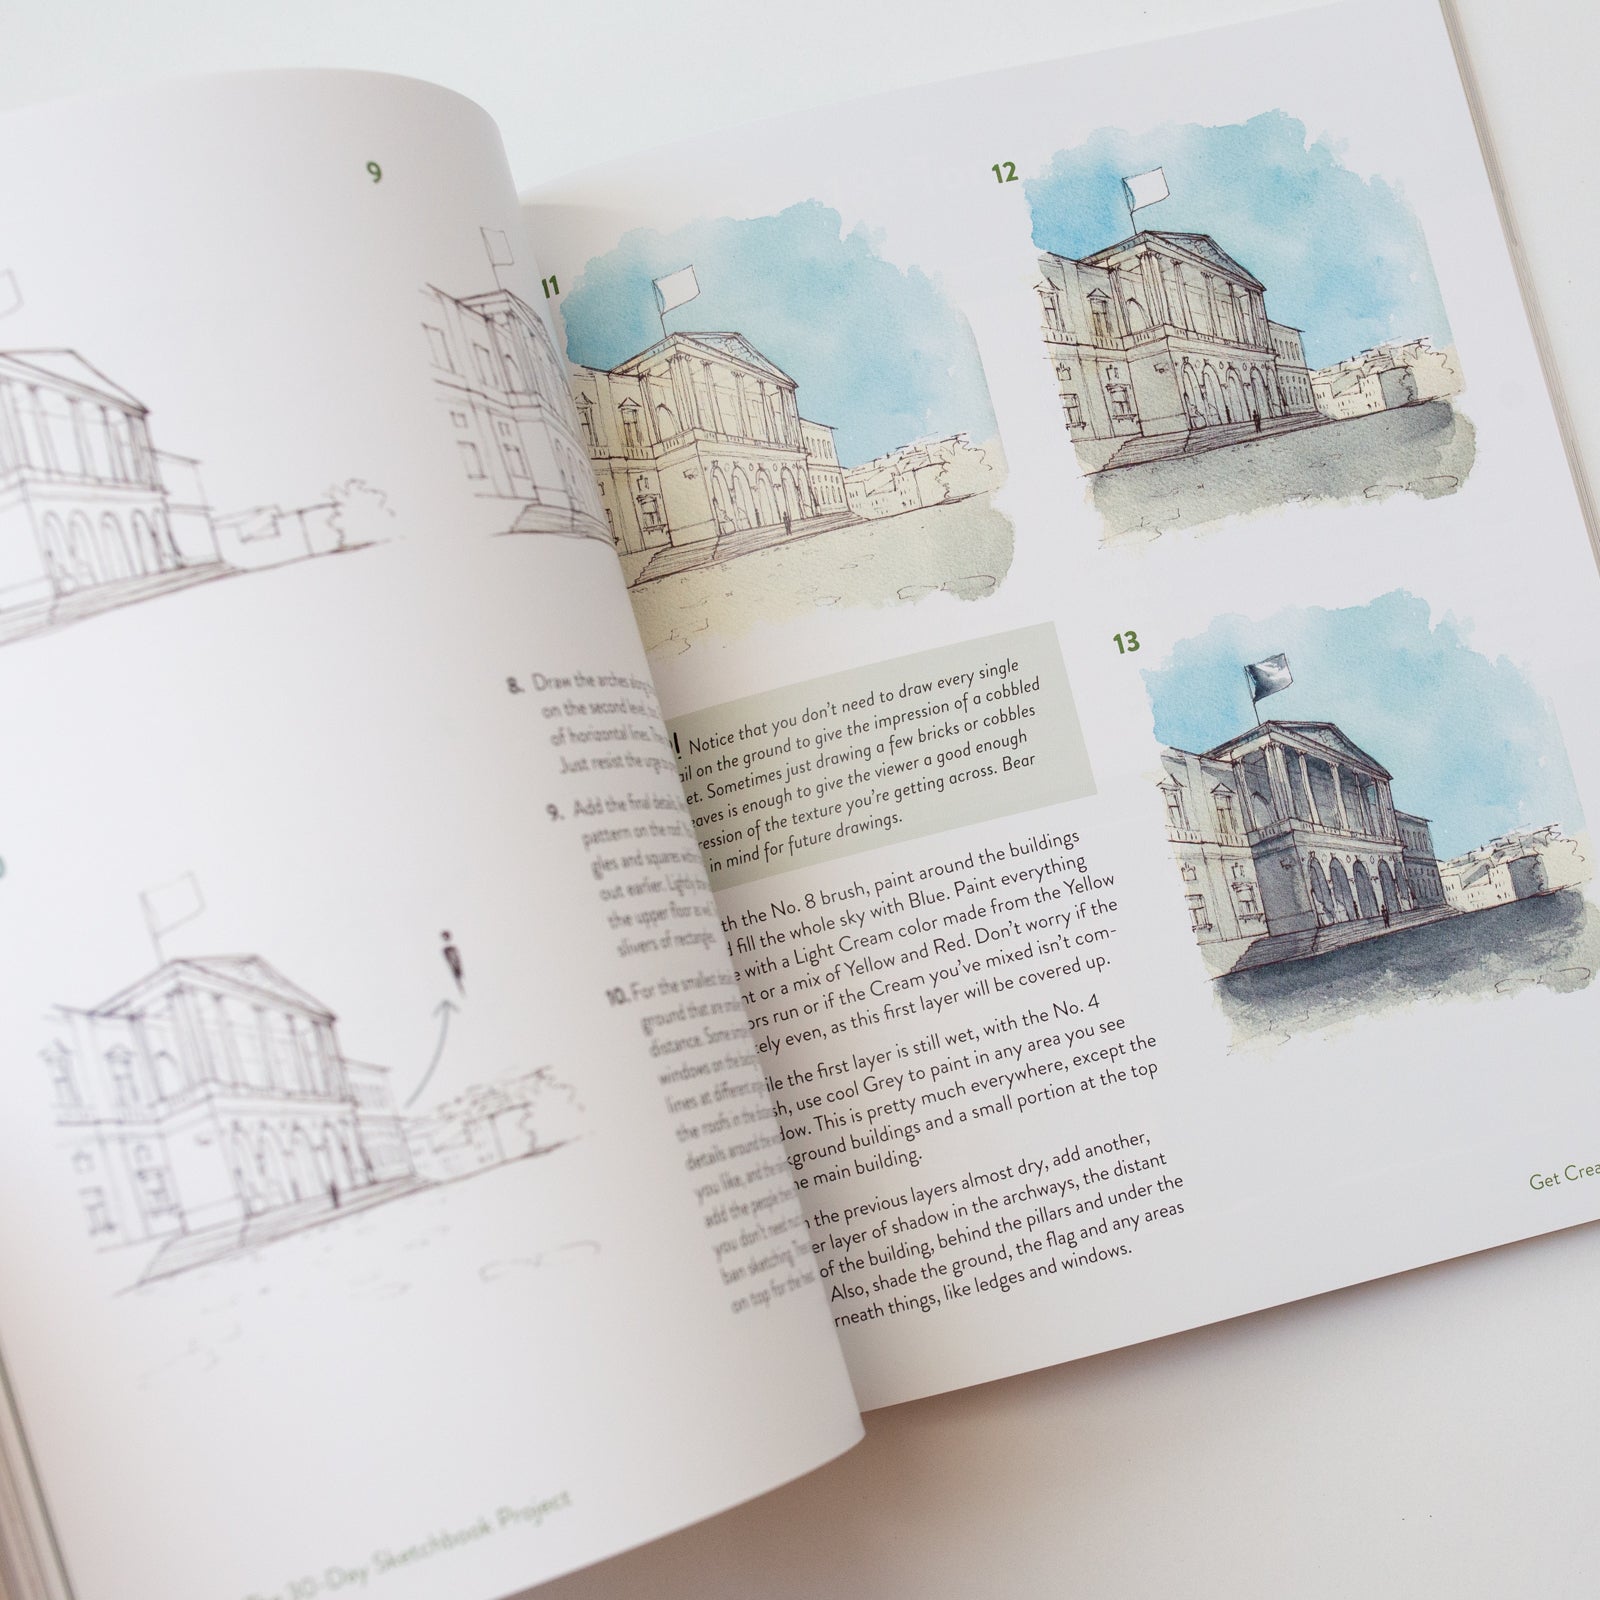 The 30 day sketchbook project by Minnie Small